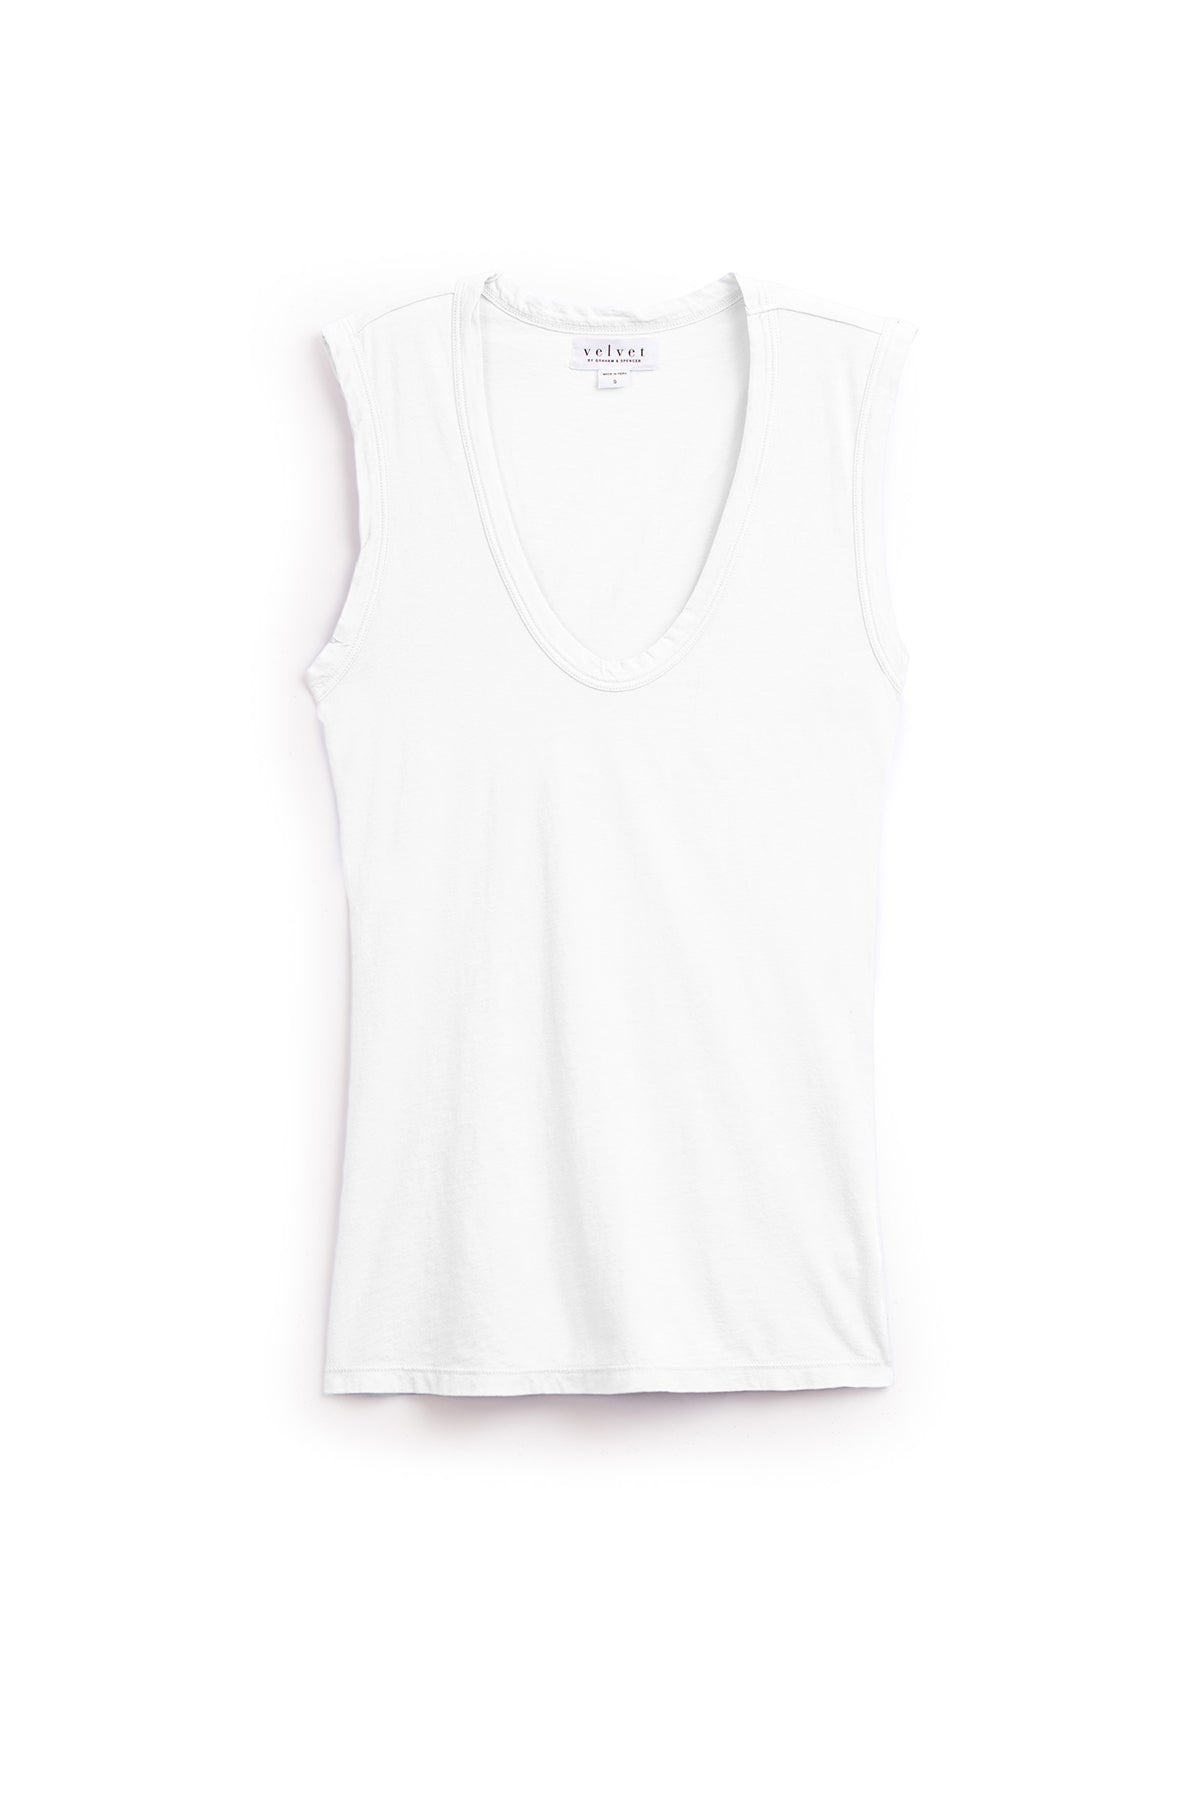   A sleeveless white V-neck top displayed against a plain white background exudes effortless style, featuring a laid-back tank design with soft gauzy whisper fabric: the ESTINA TANK TOP by Velvet by Graham & Spencer. 